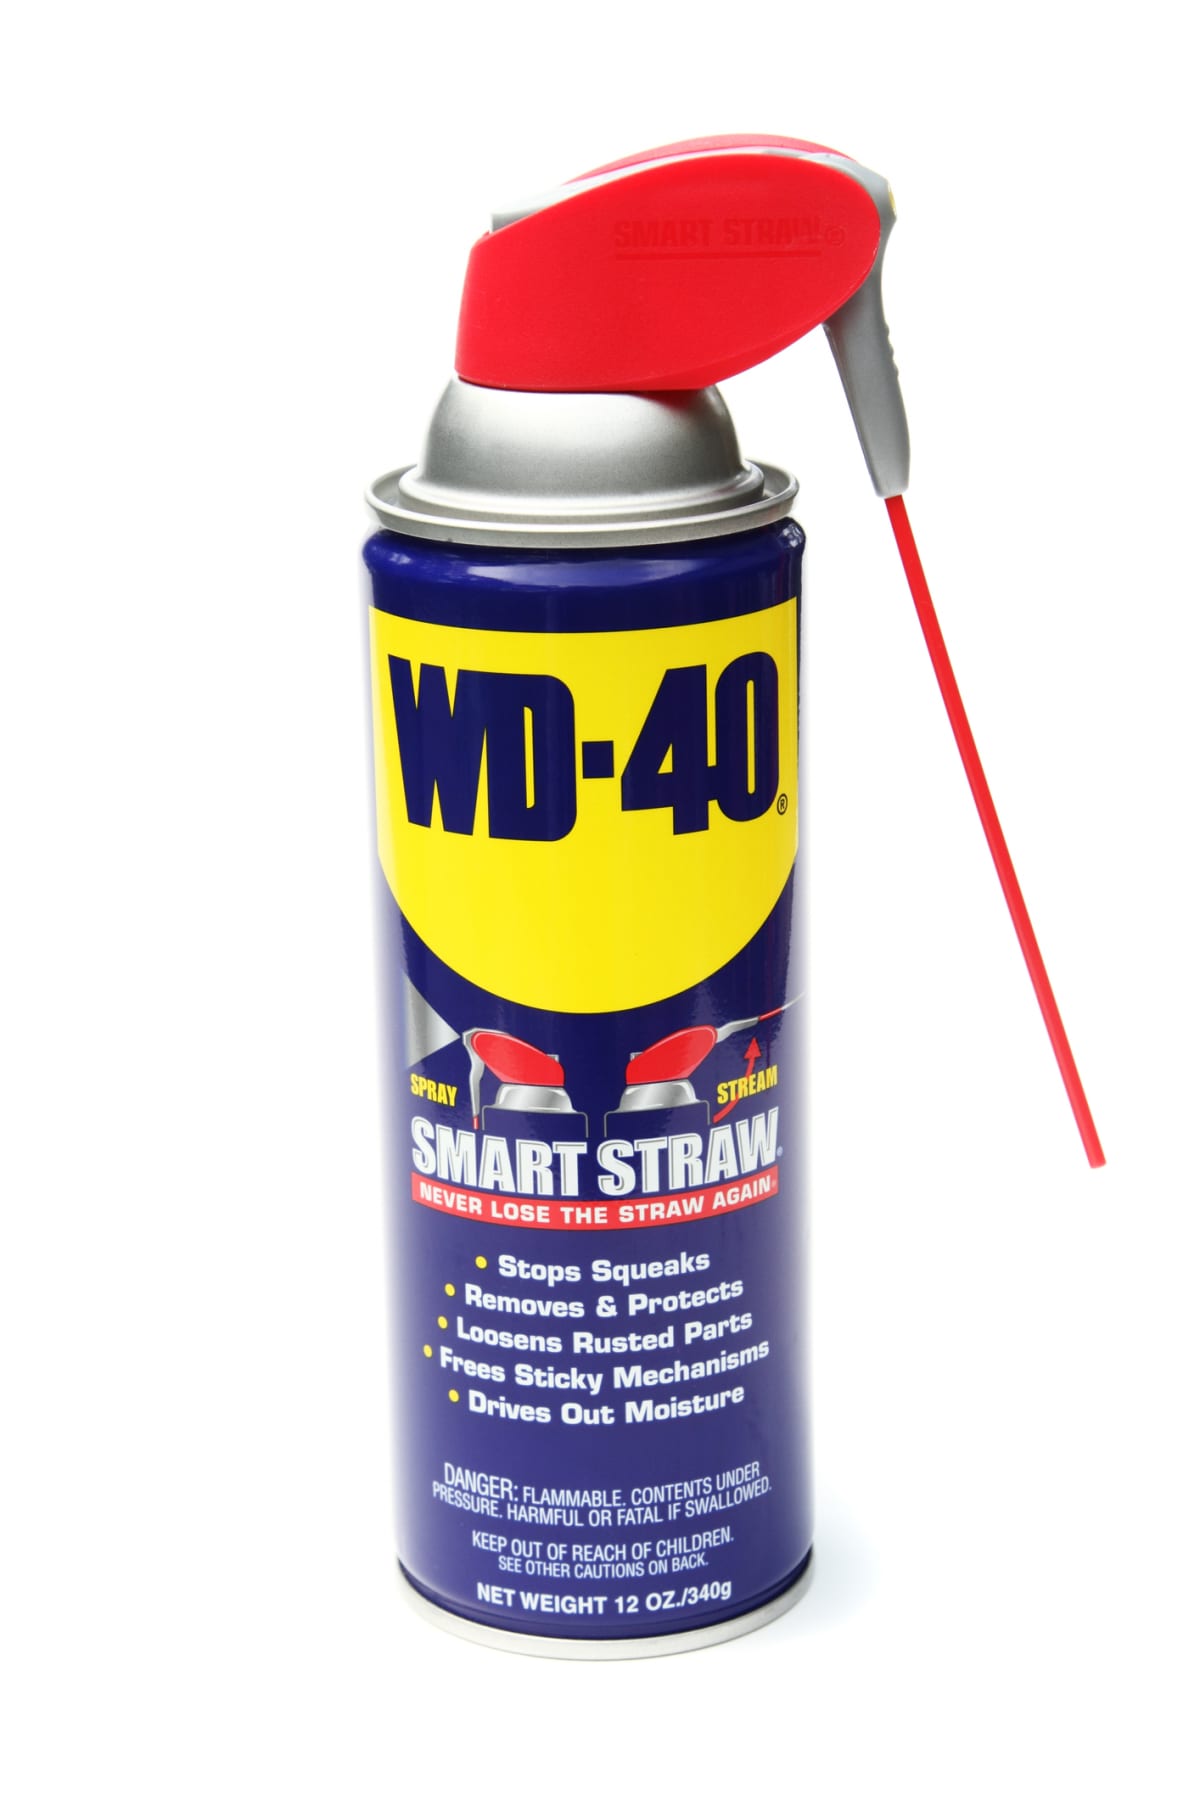 Studio product shot of a spray can of WD-40.